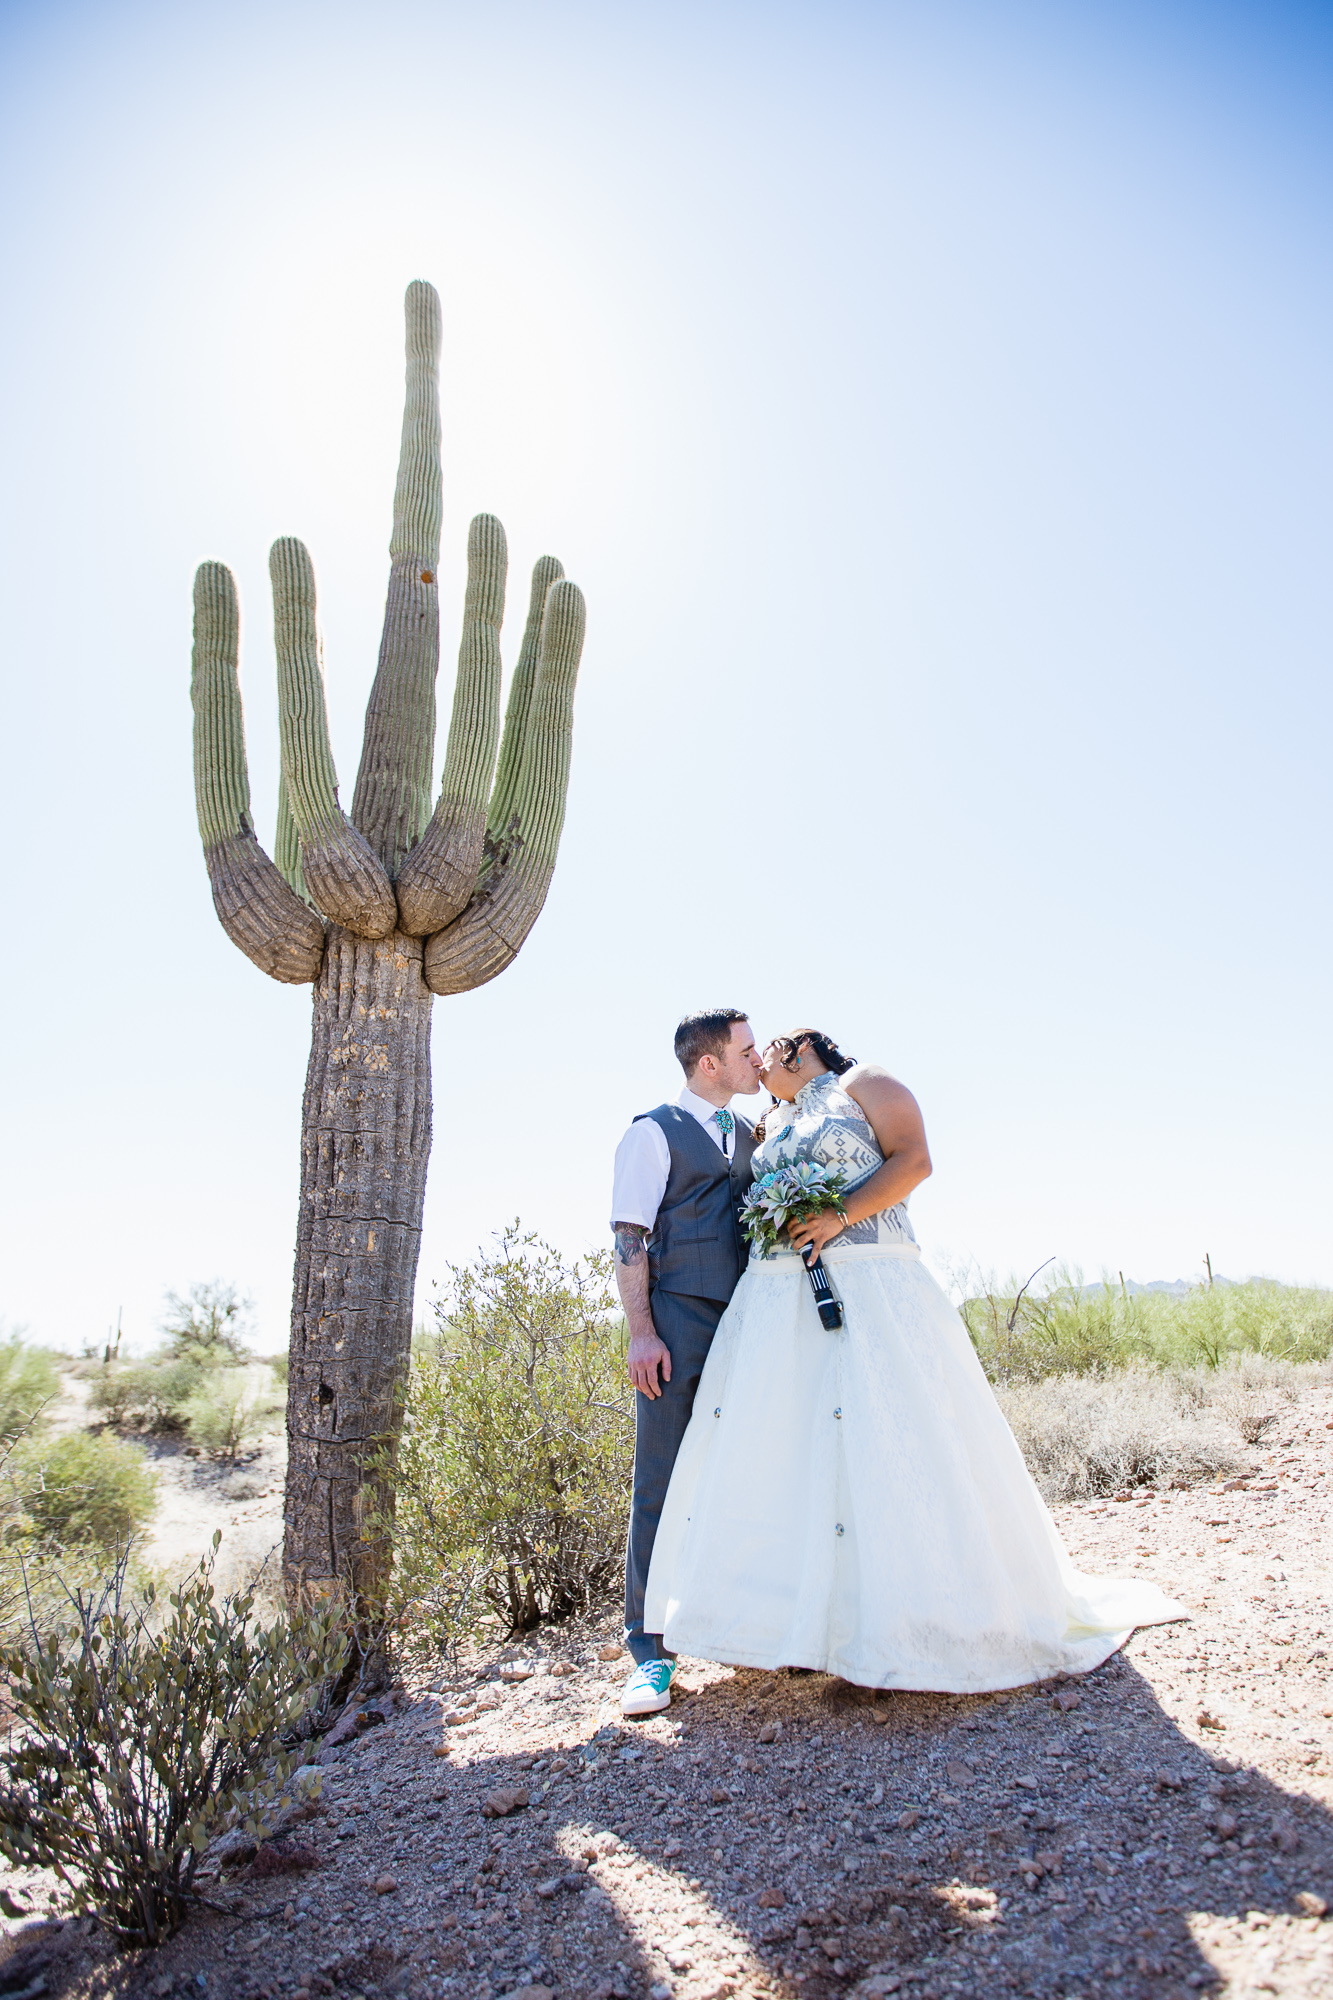 Tattooed Irish groom and Navajo bride in front of a Saguaro cactus at their Lost Dutchman State Park Turquoise Star Wars wedding by Phoenix wedding photographers PMA Photography.